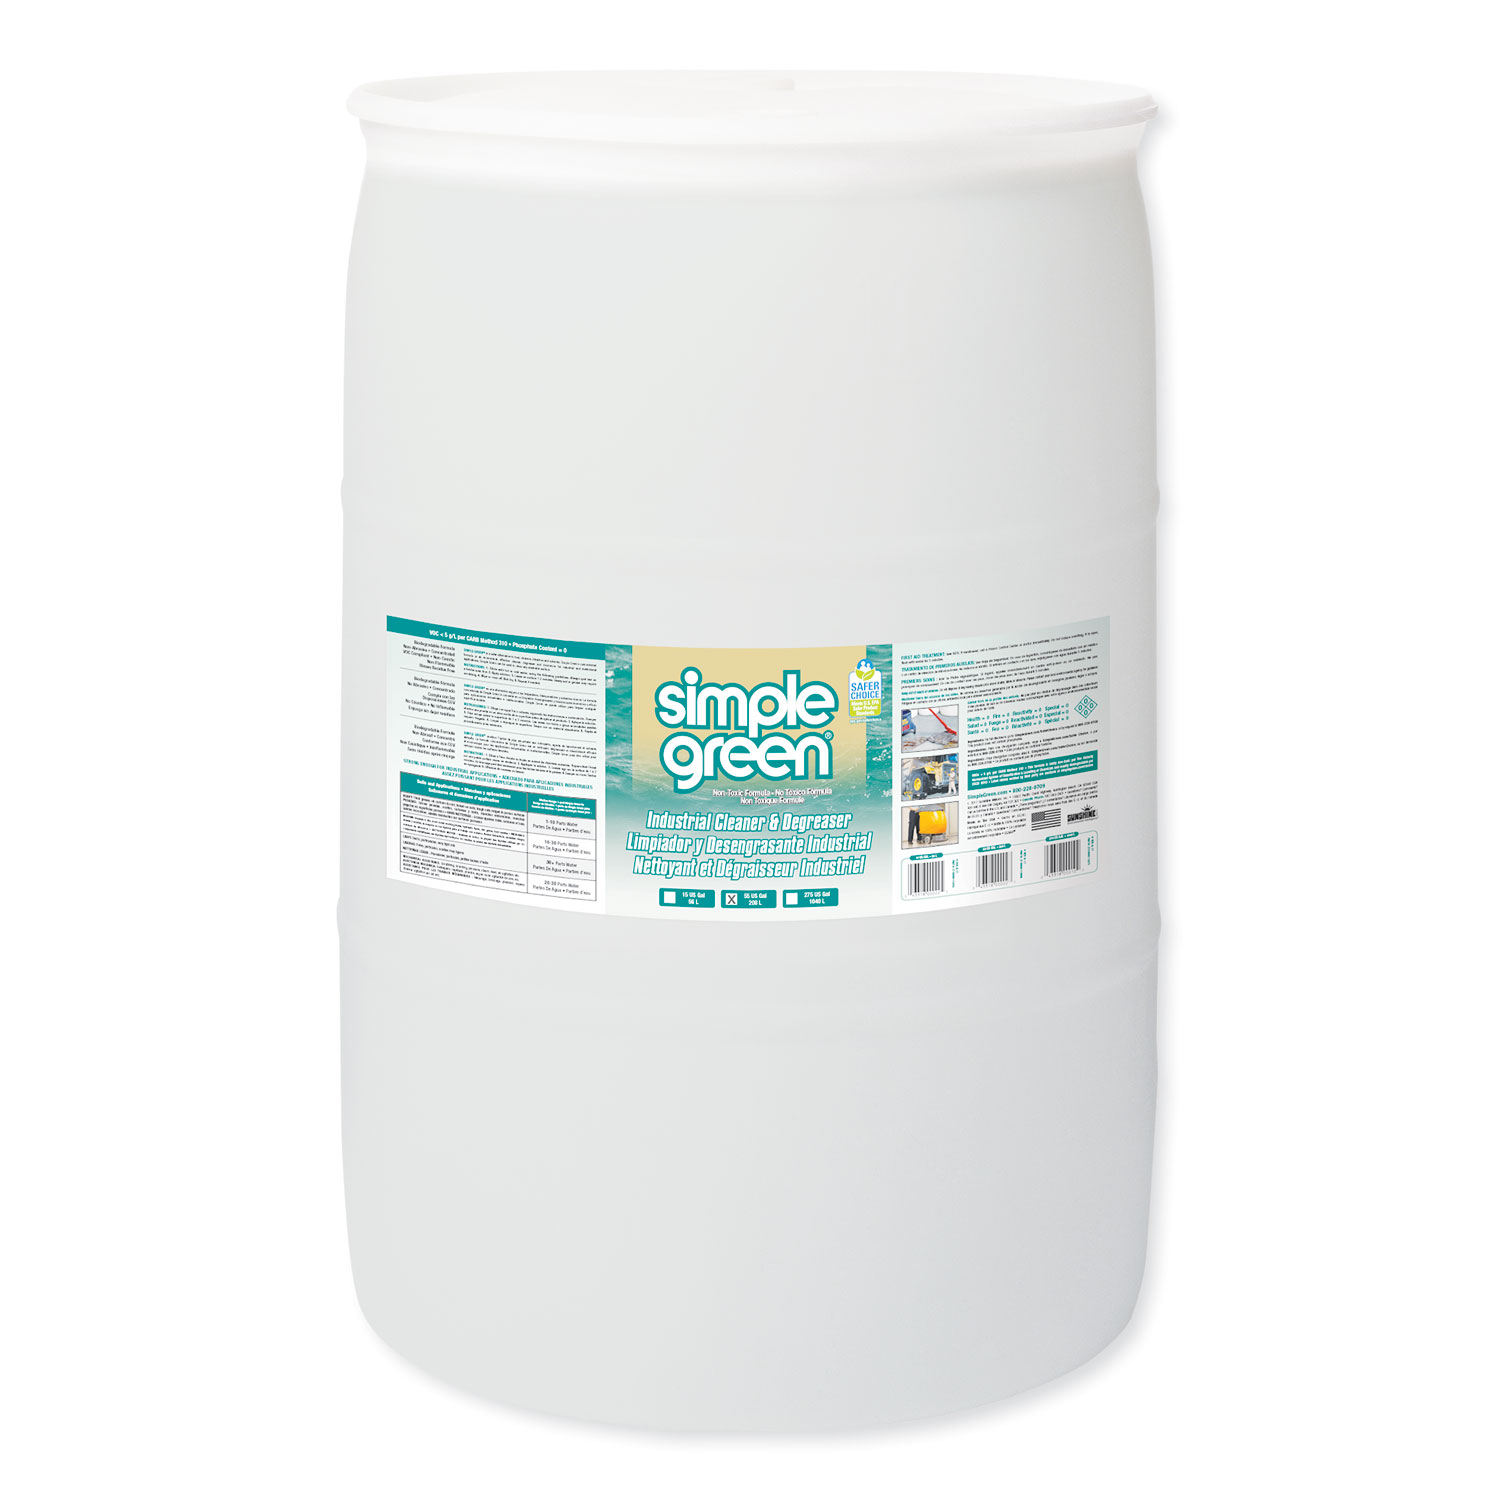 Simple Green Industrial Cleaner and Degreaser - Concentrated, 55 Gallon Drum